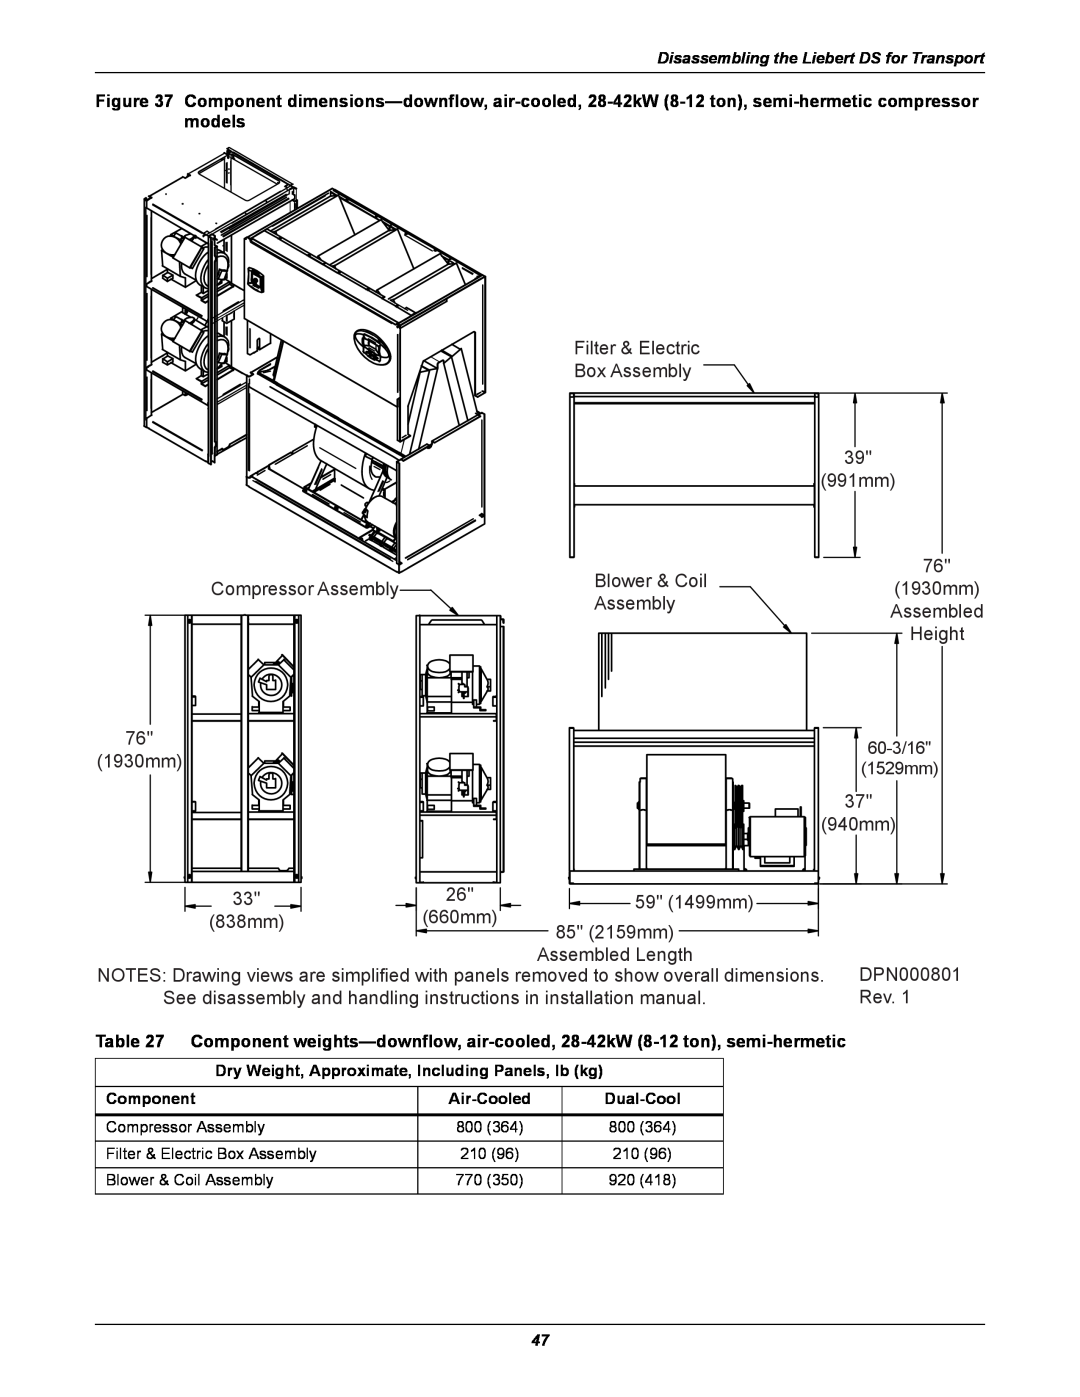 Liebert DS user manual 60-3/16, 1529mm, Compressor Assembly, Filter & Electric Box Assembly, Blower & Coil Assembly 